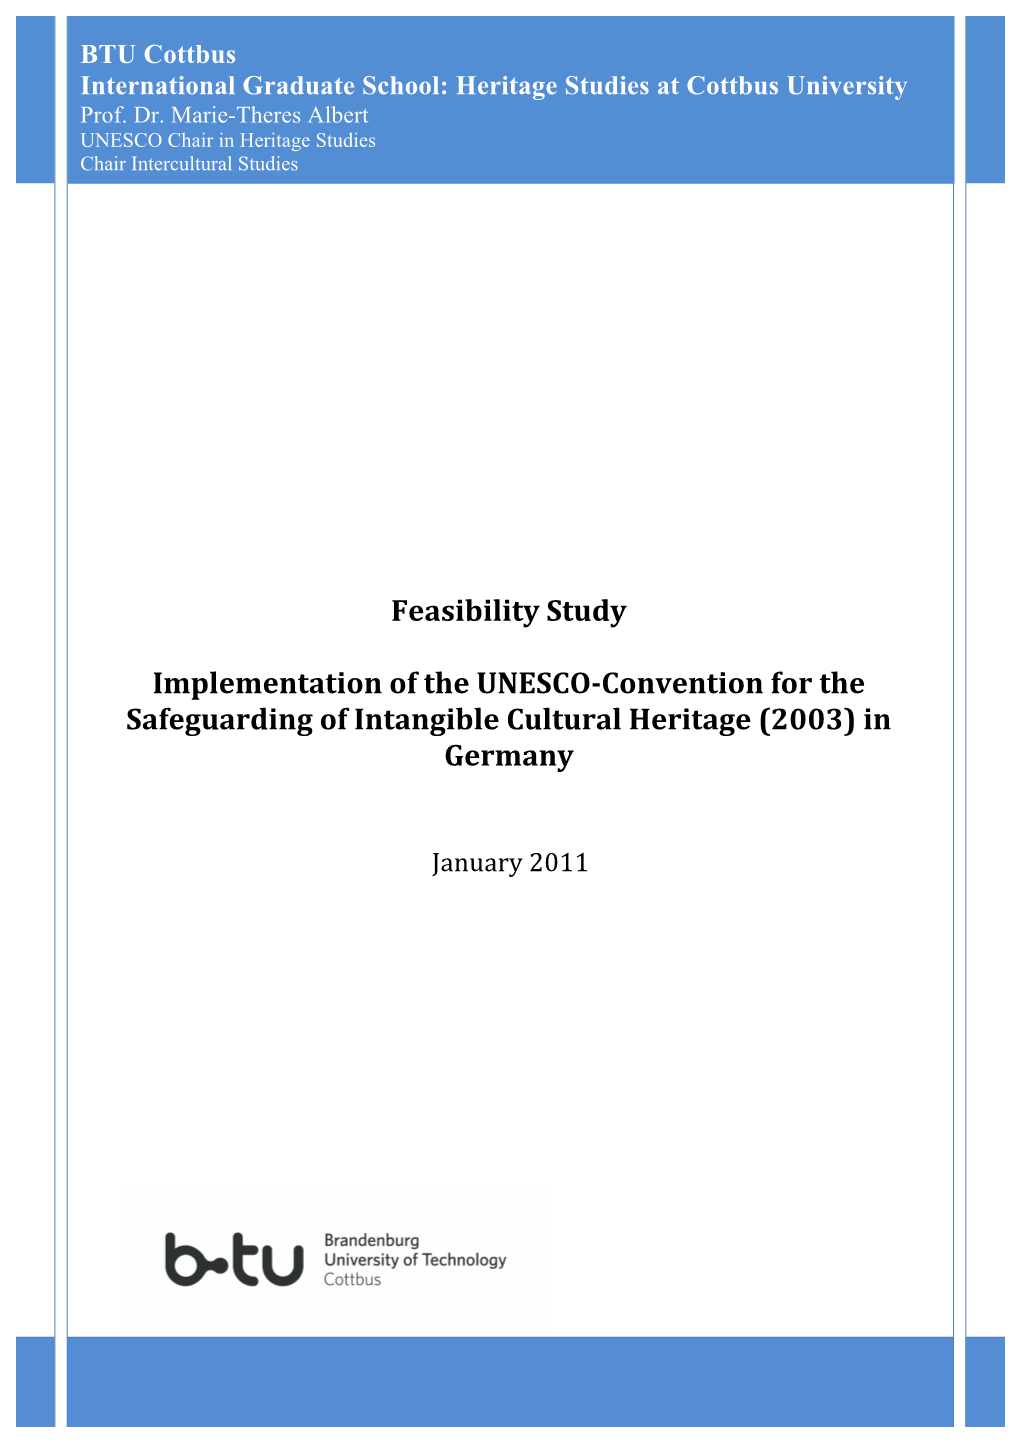 Feasibility Study Implementation of The